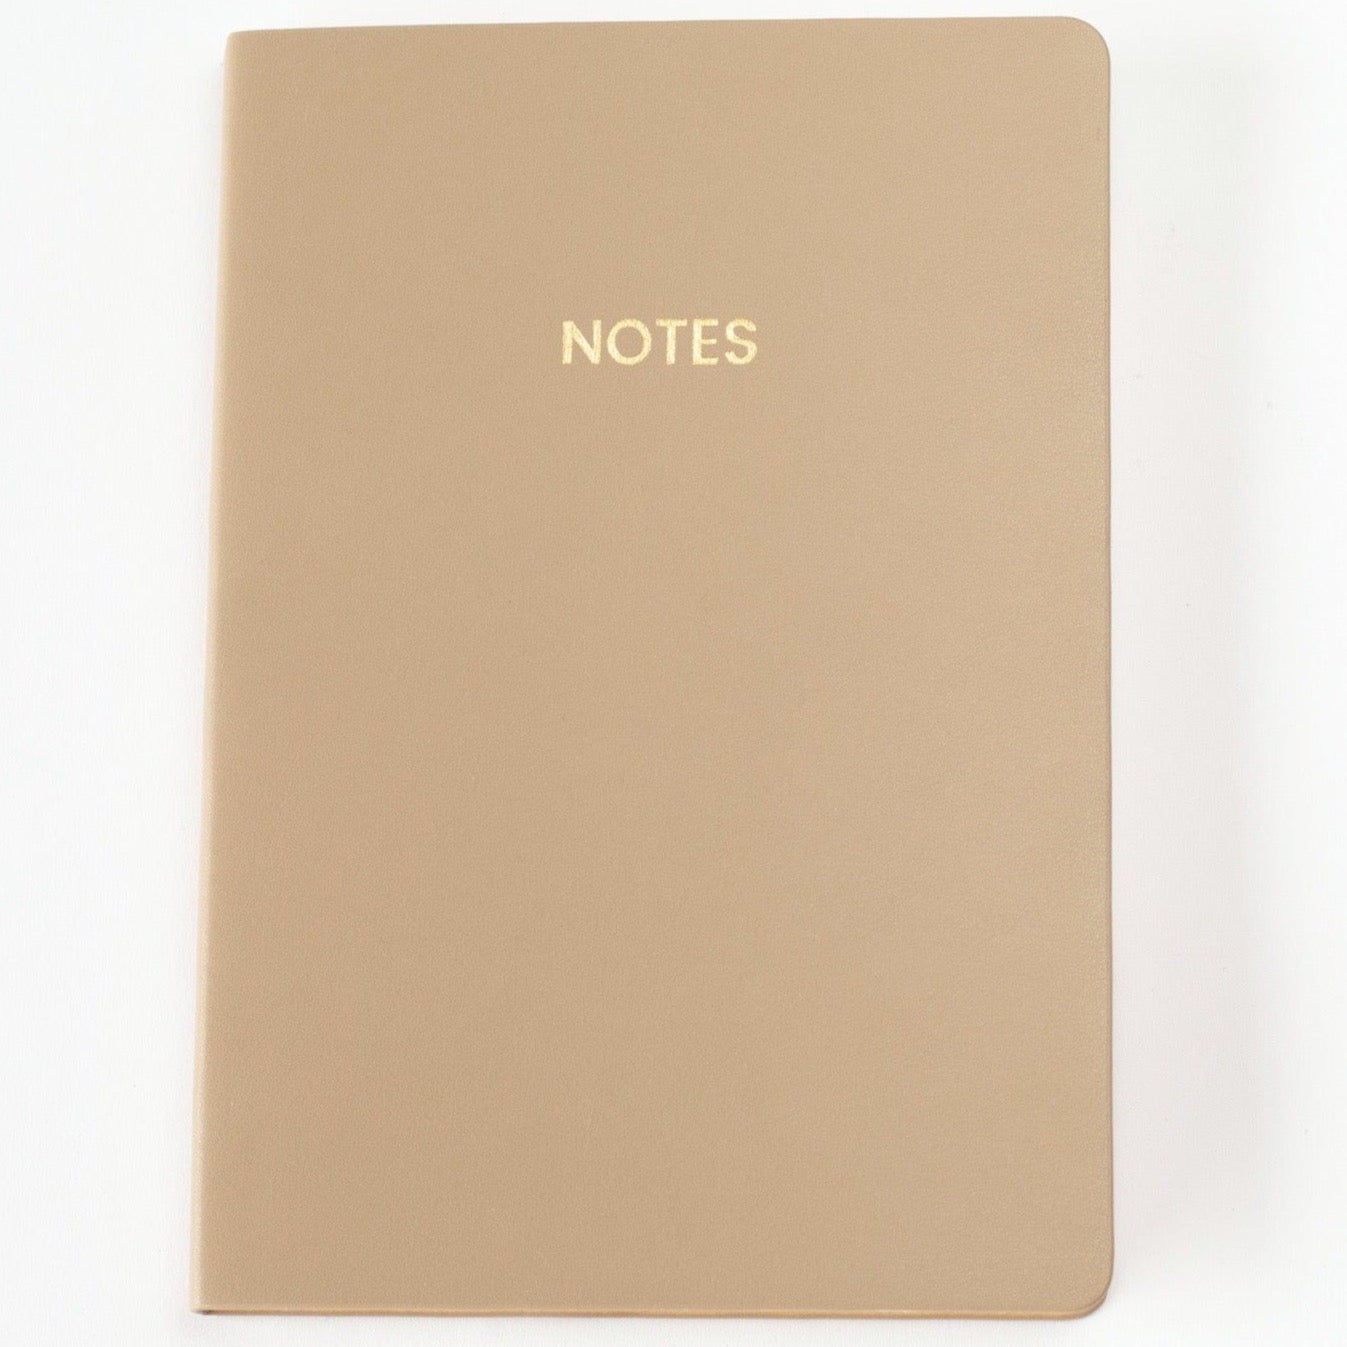 A light brown colored vegan leather notebook with gold foil text reading &quot;NOTES&quot; across the front photographed against a white background.